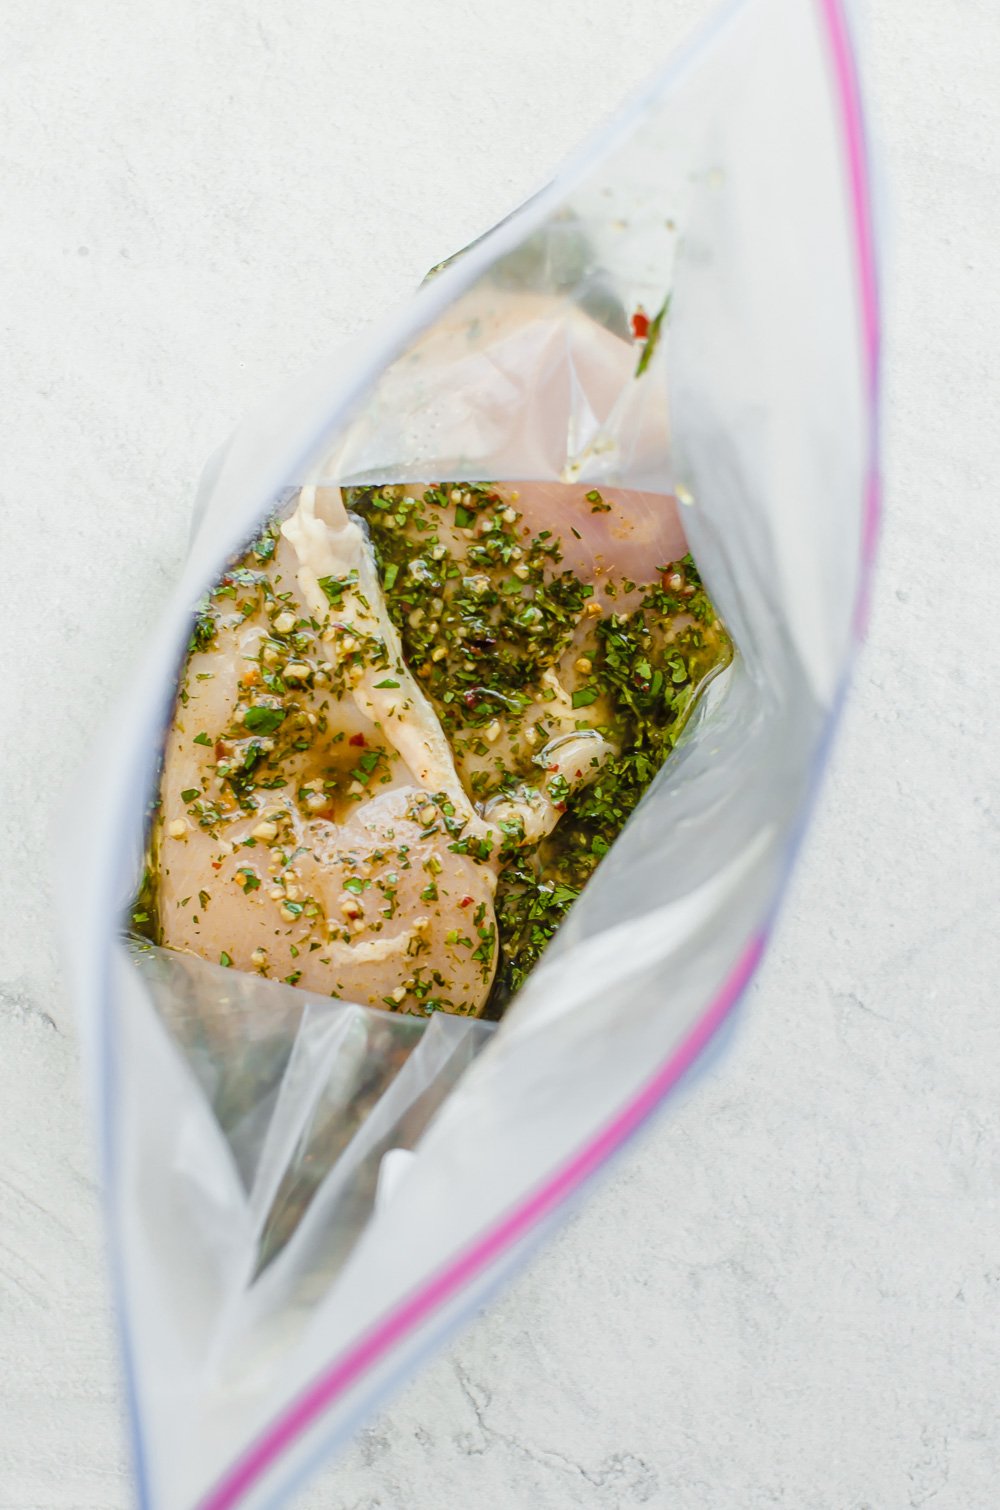 cilantro lime marinade over chicken breasts in an open freezer bag